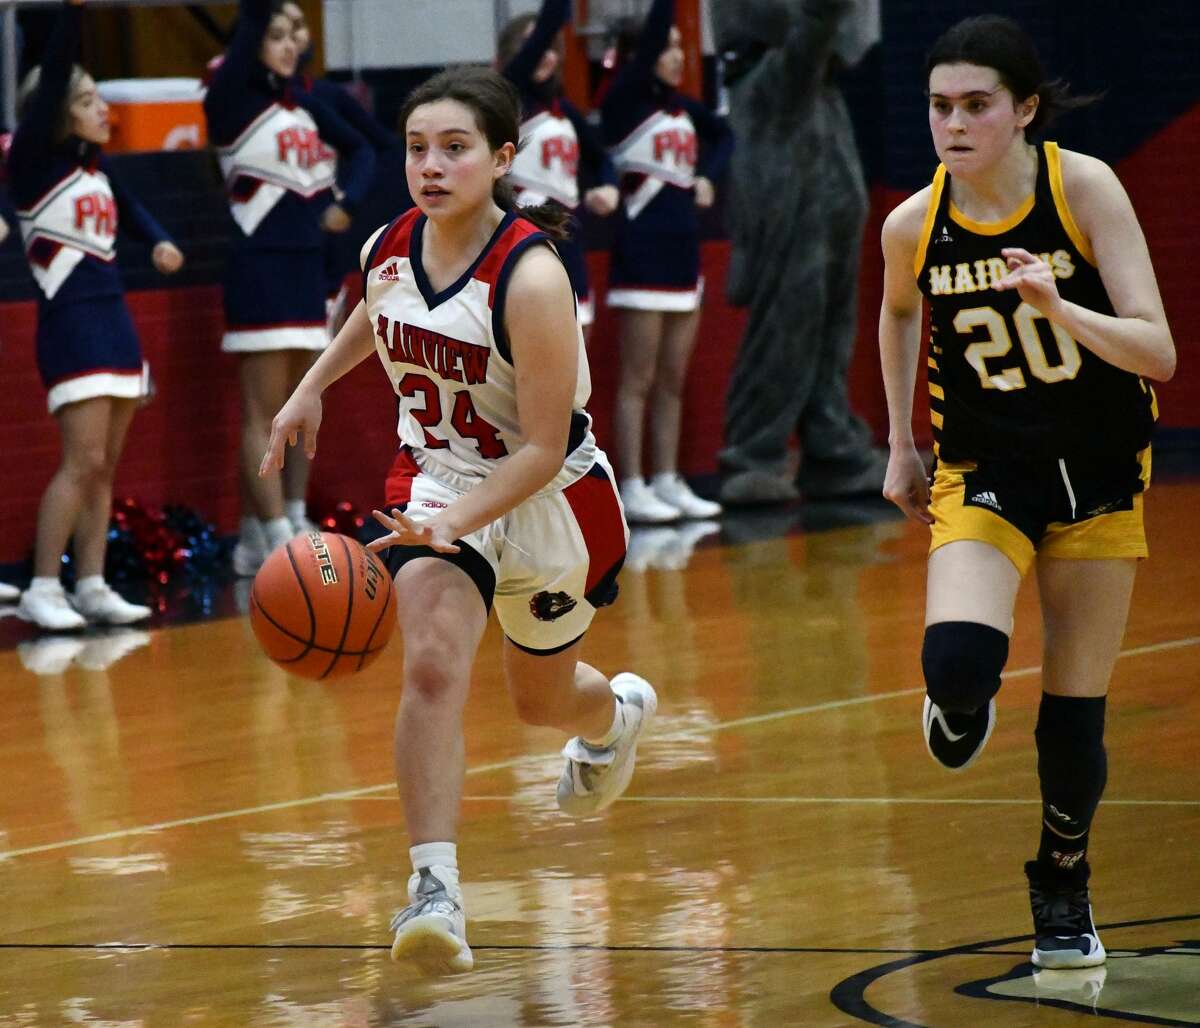 The Plainview girls basketball team rolled past Seminole 77-57 in a non-district girls basketball game on Dec. 1, 2020 in the Dog House at Plainview High School.